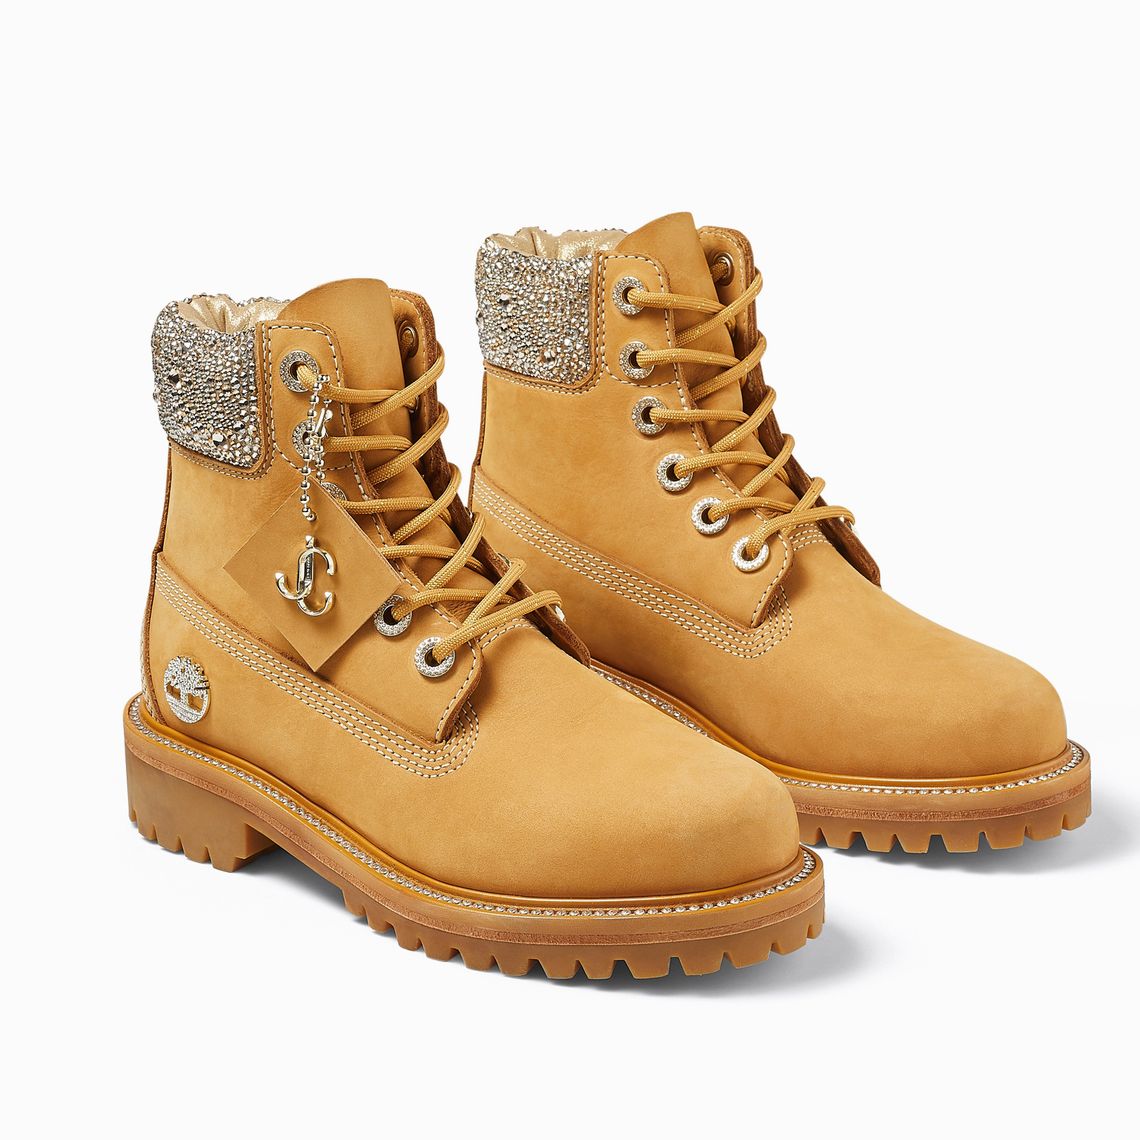 off brand timberland boots